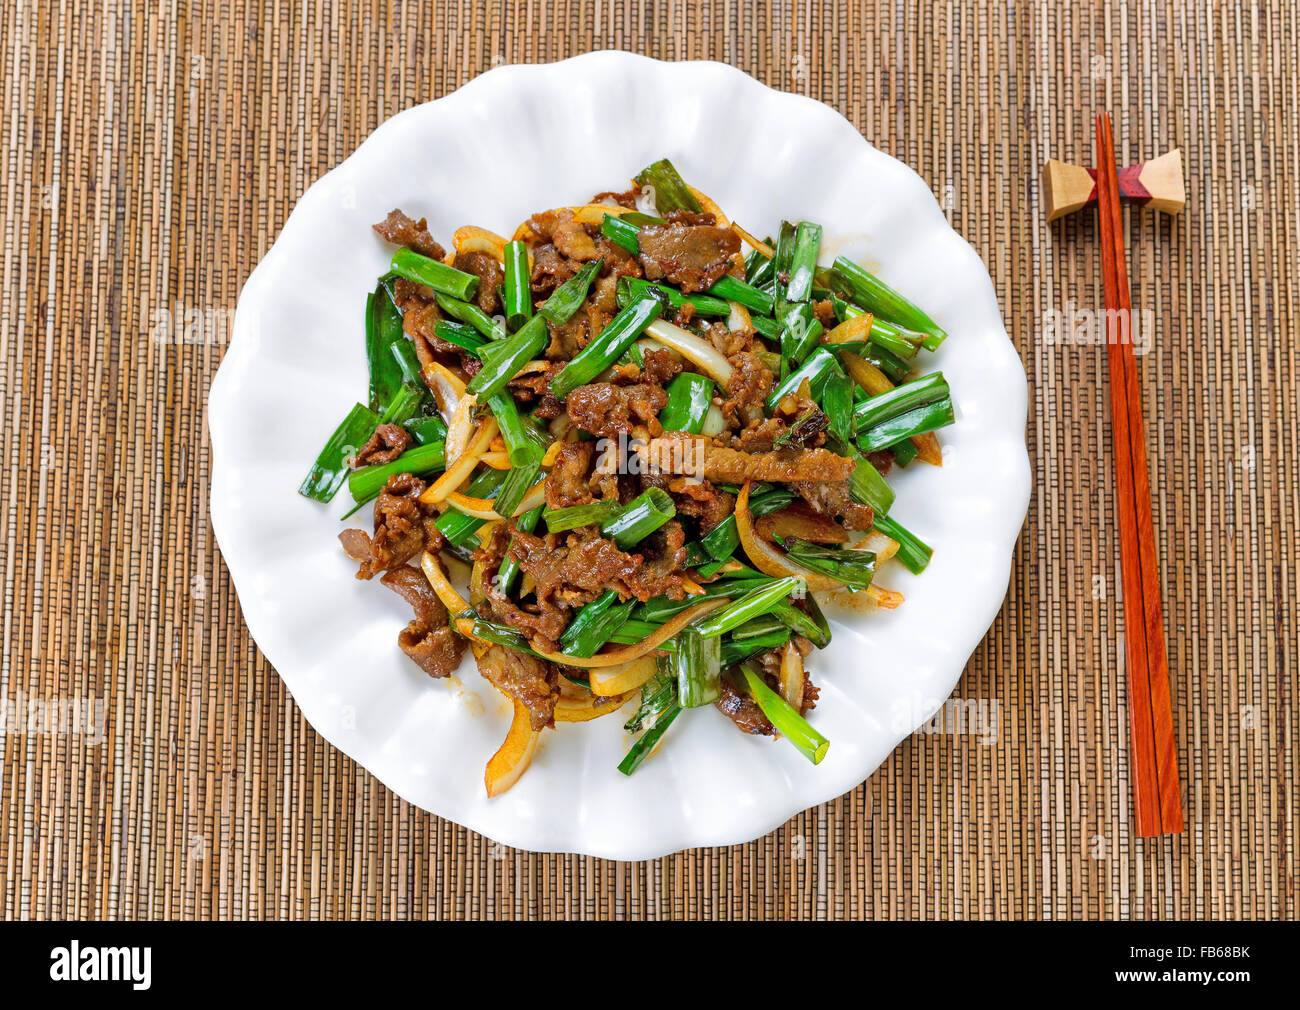 Top view of beef and green onions in white plate with bamboo mat underneath. Stock Photo